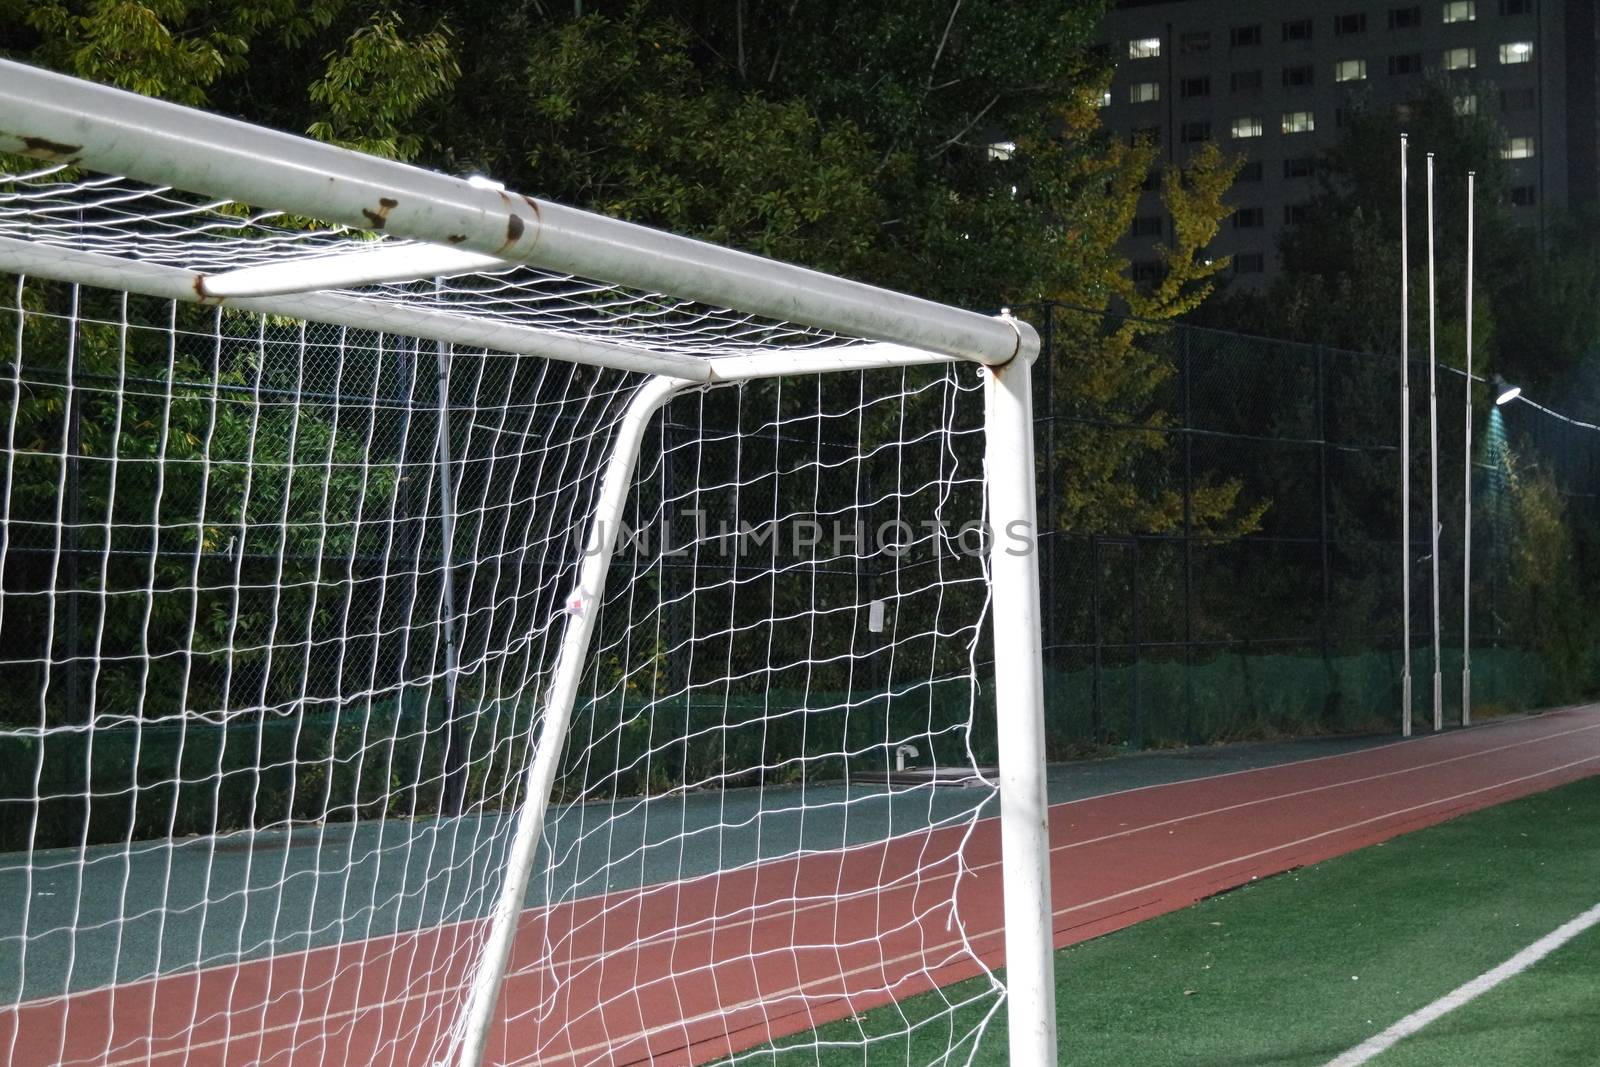 Closeup view of goal net in a soccer playground by Photochowk